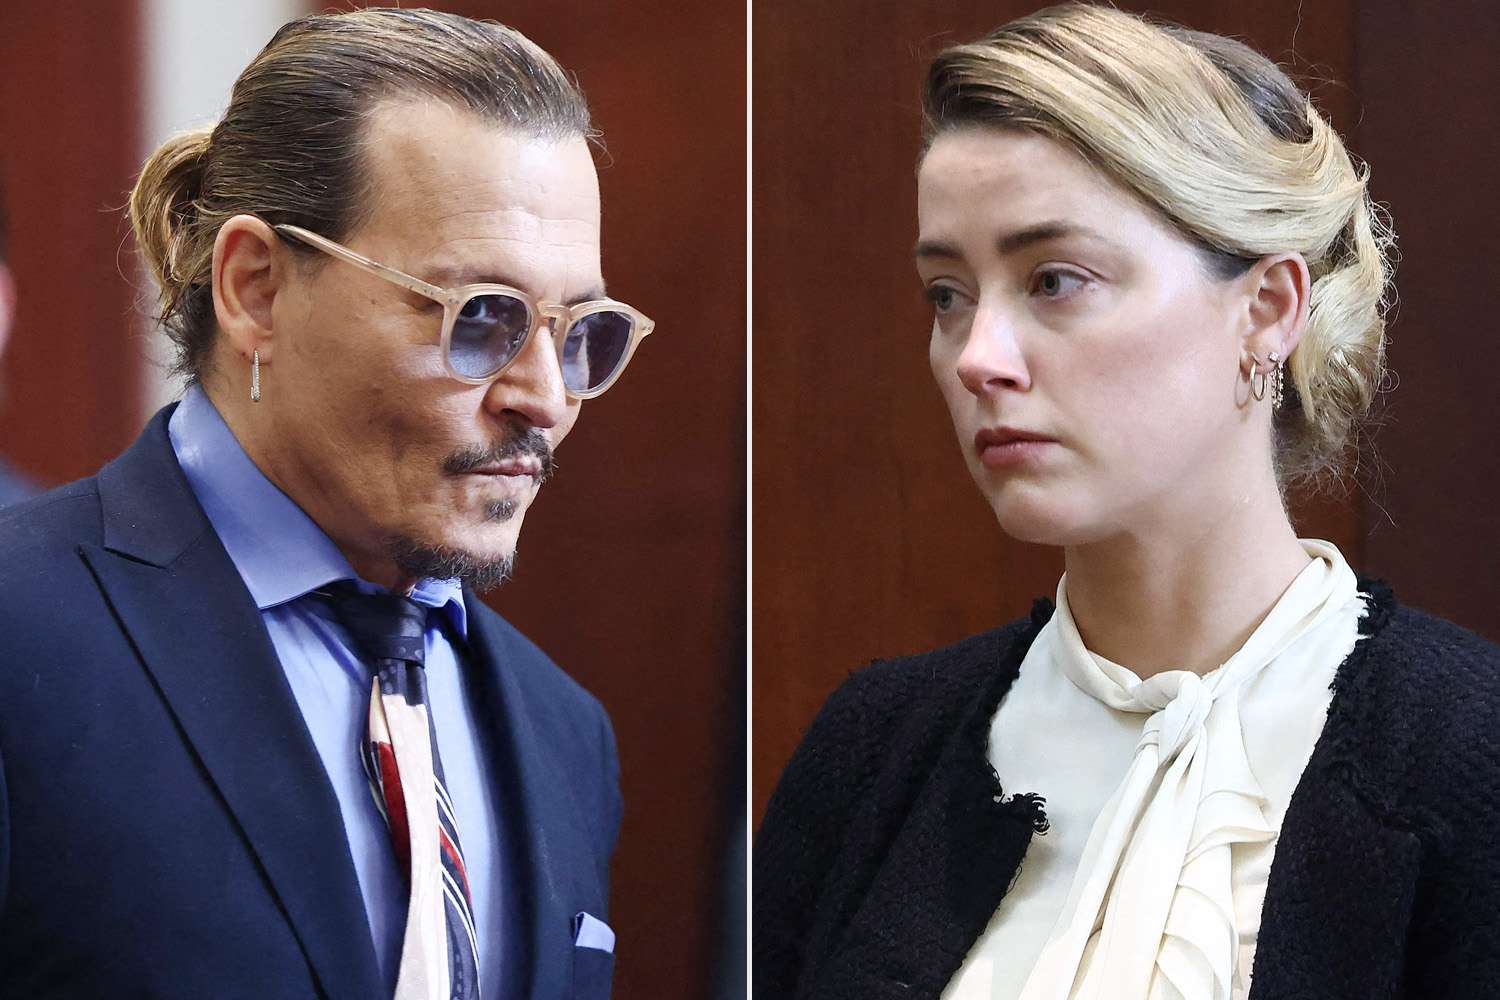 Johnny Depp leaves for recess in Fairfax County Courthouse in Fairfax, Virginia, on May 5, 2022. - Actor Johnny Depp sues his ex-wife Amber Heard for defamation after she wrote an opinion piece for The Washington Post in 2018. She refers to herself as a public figure representing Domestic Violence.  (Photo by Jim LO SCALZO/POOL/AFP) (Photo by JIM LO SCALZO/POOL/AFP via Getty Images);  Amber Heard (left) testifies as US actor Johnny Depp looks on during a defamation trial in Fairfax County Courthouse in Fairfax, Virginia, on May 5, 2022. - Actor Johnny Depp sues his ex-wife Amber Heard for defamation after she wrote an op-ed in the Washington Post in 2018 refers to herself as a public figure representing domestic violence.  (Photo by Jim LO SCALZO/POOL/AFP) (Photo by JIM LO SCALZO/POOL/AFP via Getty Images)